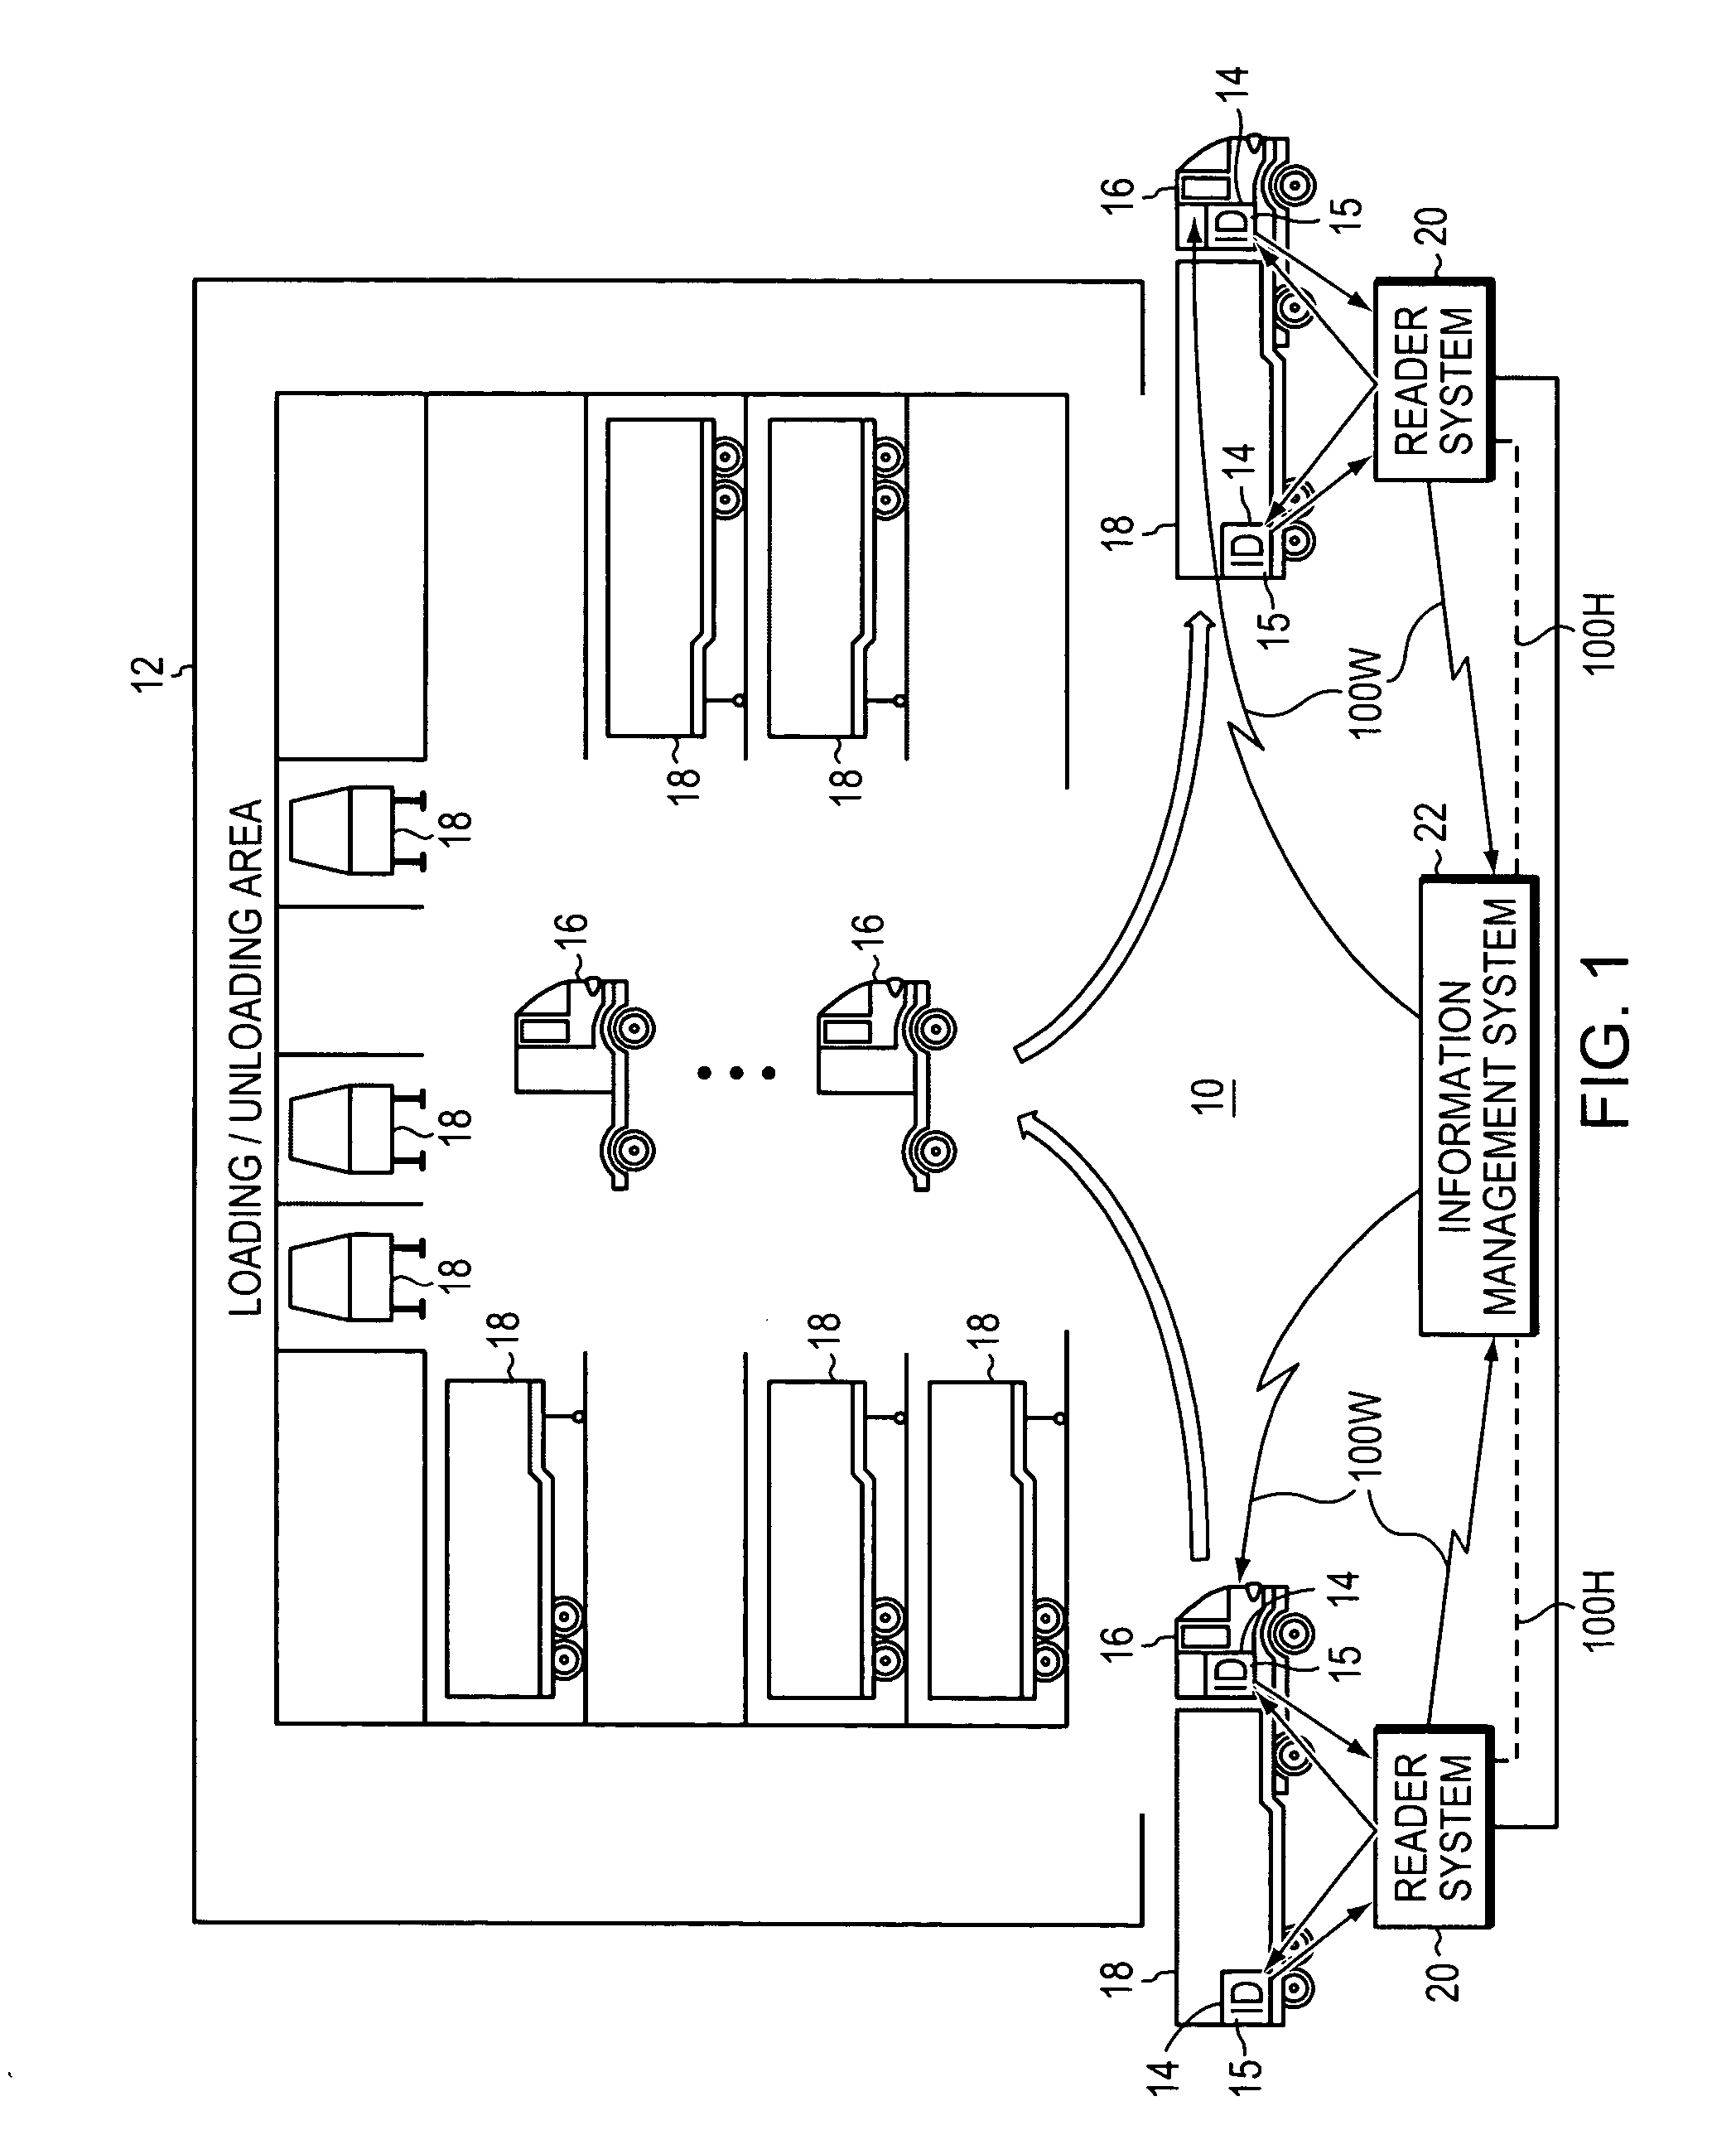 Methods and systems for automating inventory and dispatch procedures at a staging area